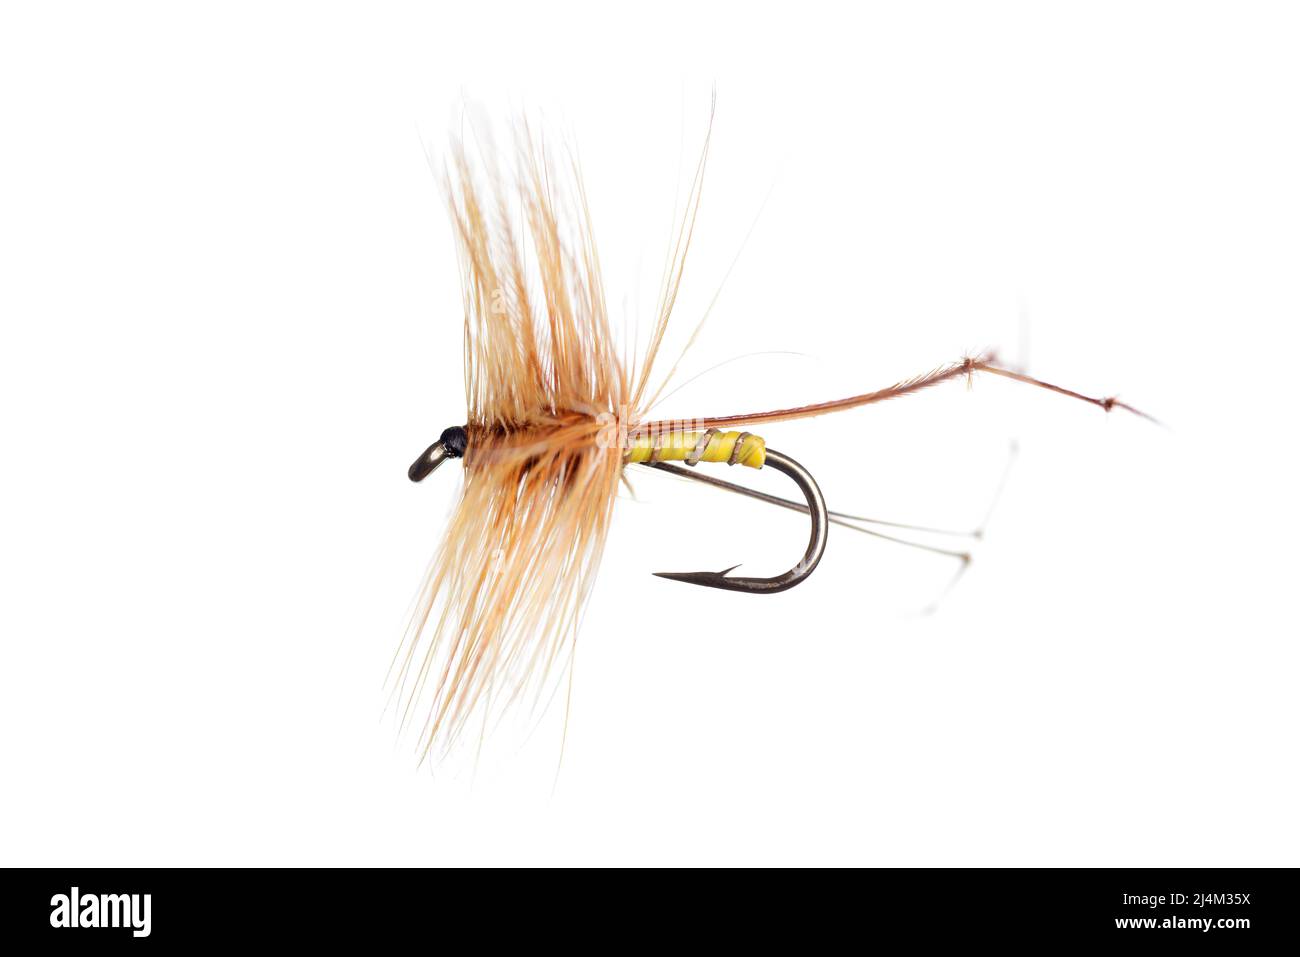 Fishing Fly isolated against a white background Stock Photo